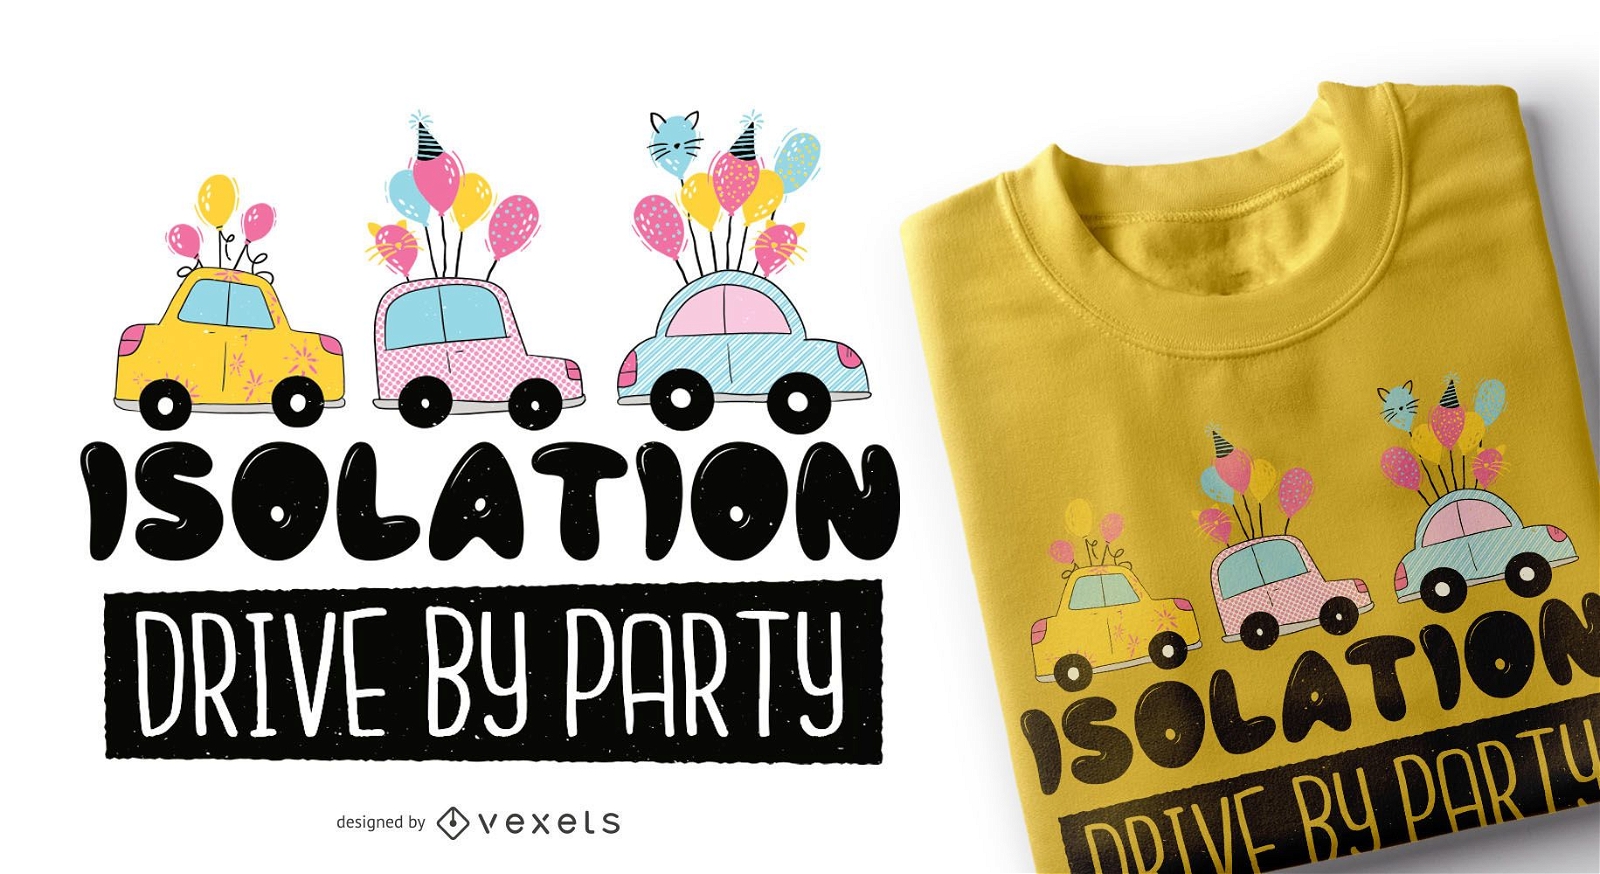 Dise?o de camiseta Isolation Drive By Party